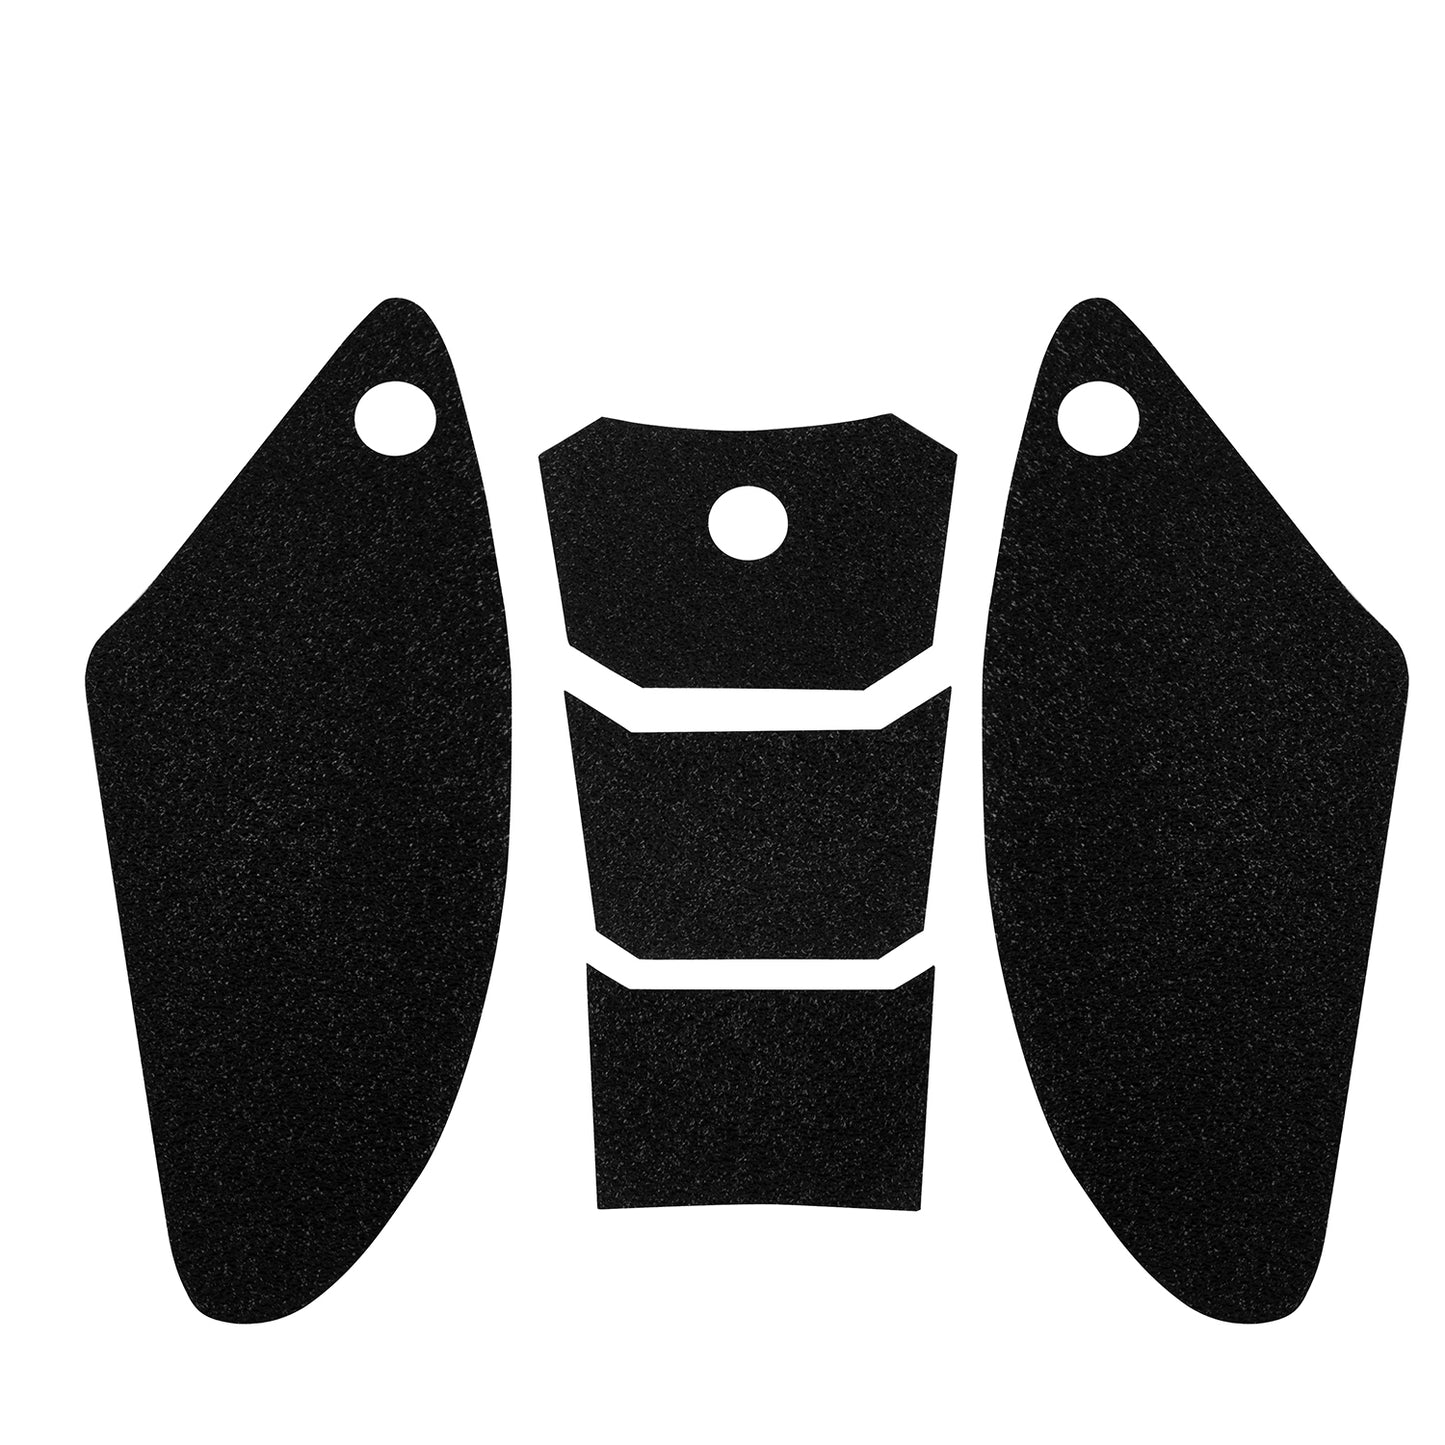 Wolfline Motorcycle Anti Slip Tank Pad Stickers Side Gas Tank Pad Knee Grip Decals Protection For Kawasaki ZX10R ZX 10R ZX10 R 2006 2007 2008